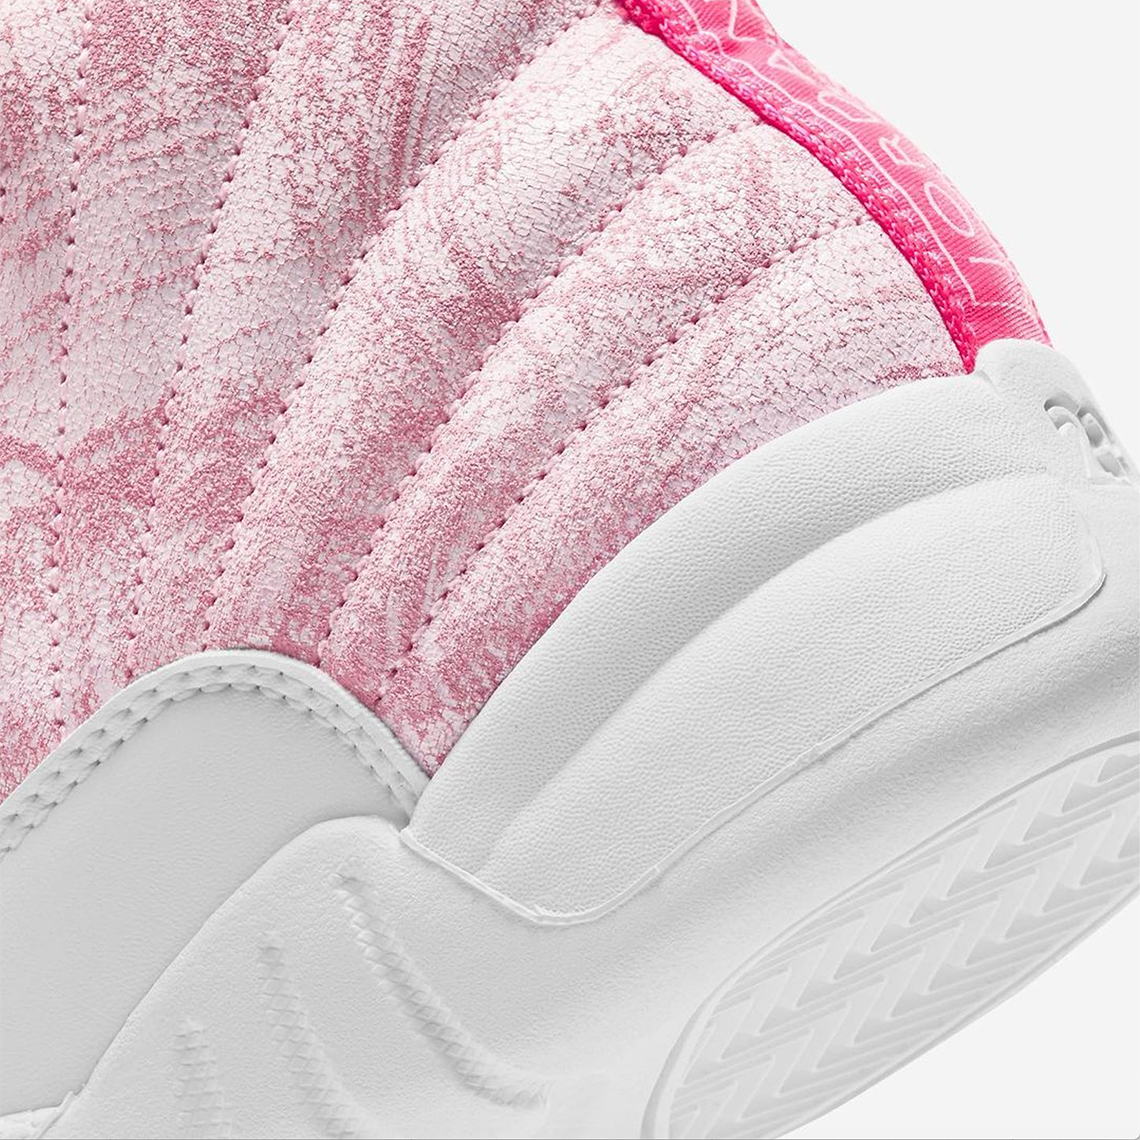 new pink and white jordans 2019